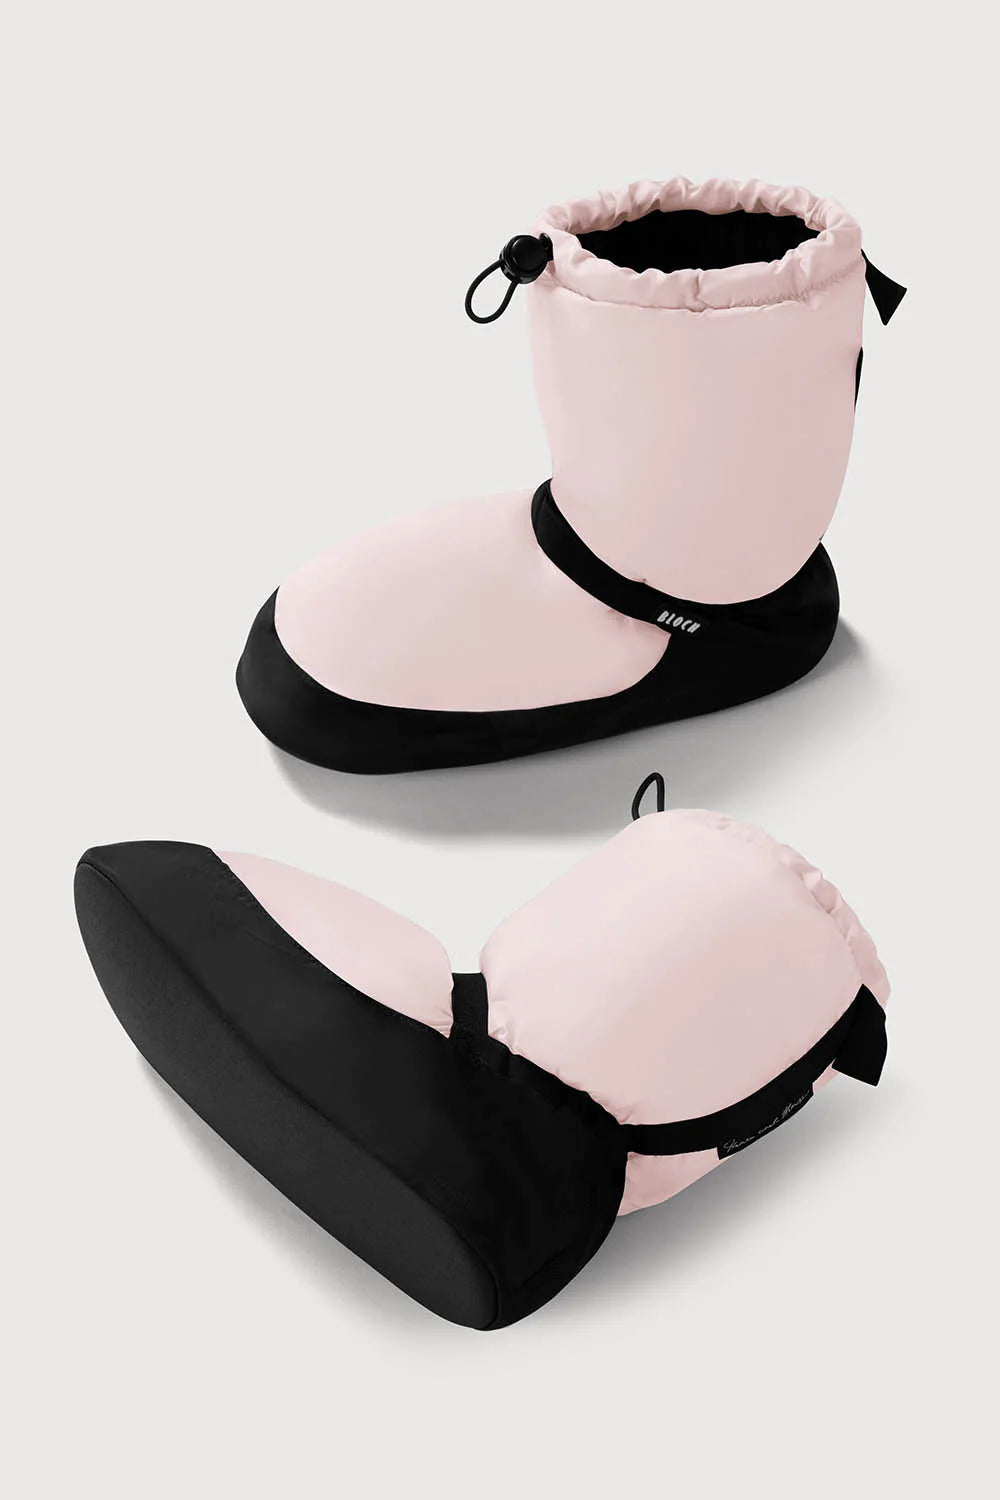 Bloch Child Warmup Booties | Candy Pink